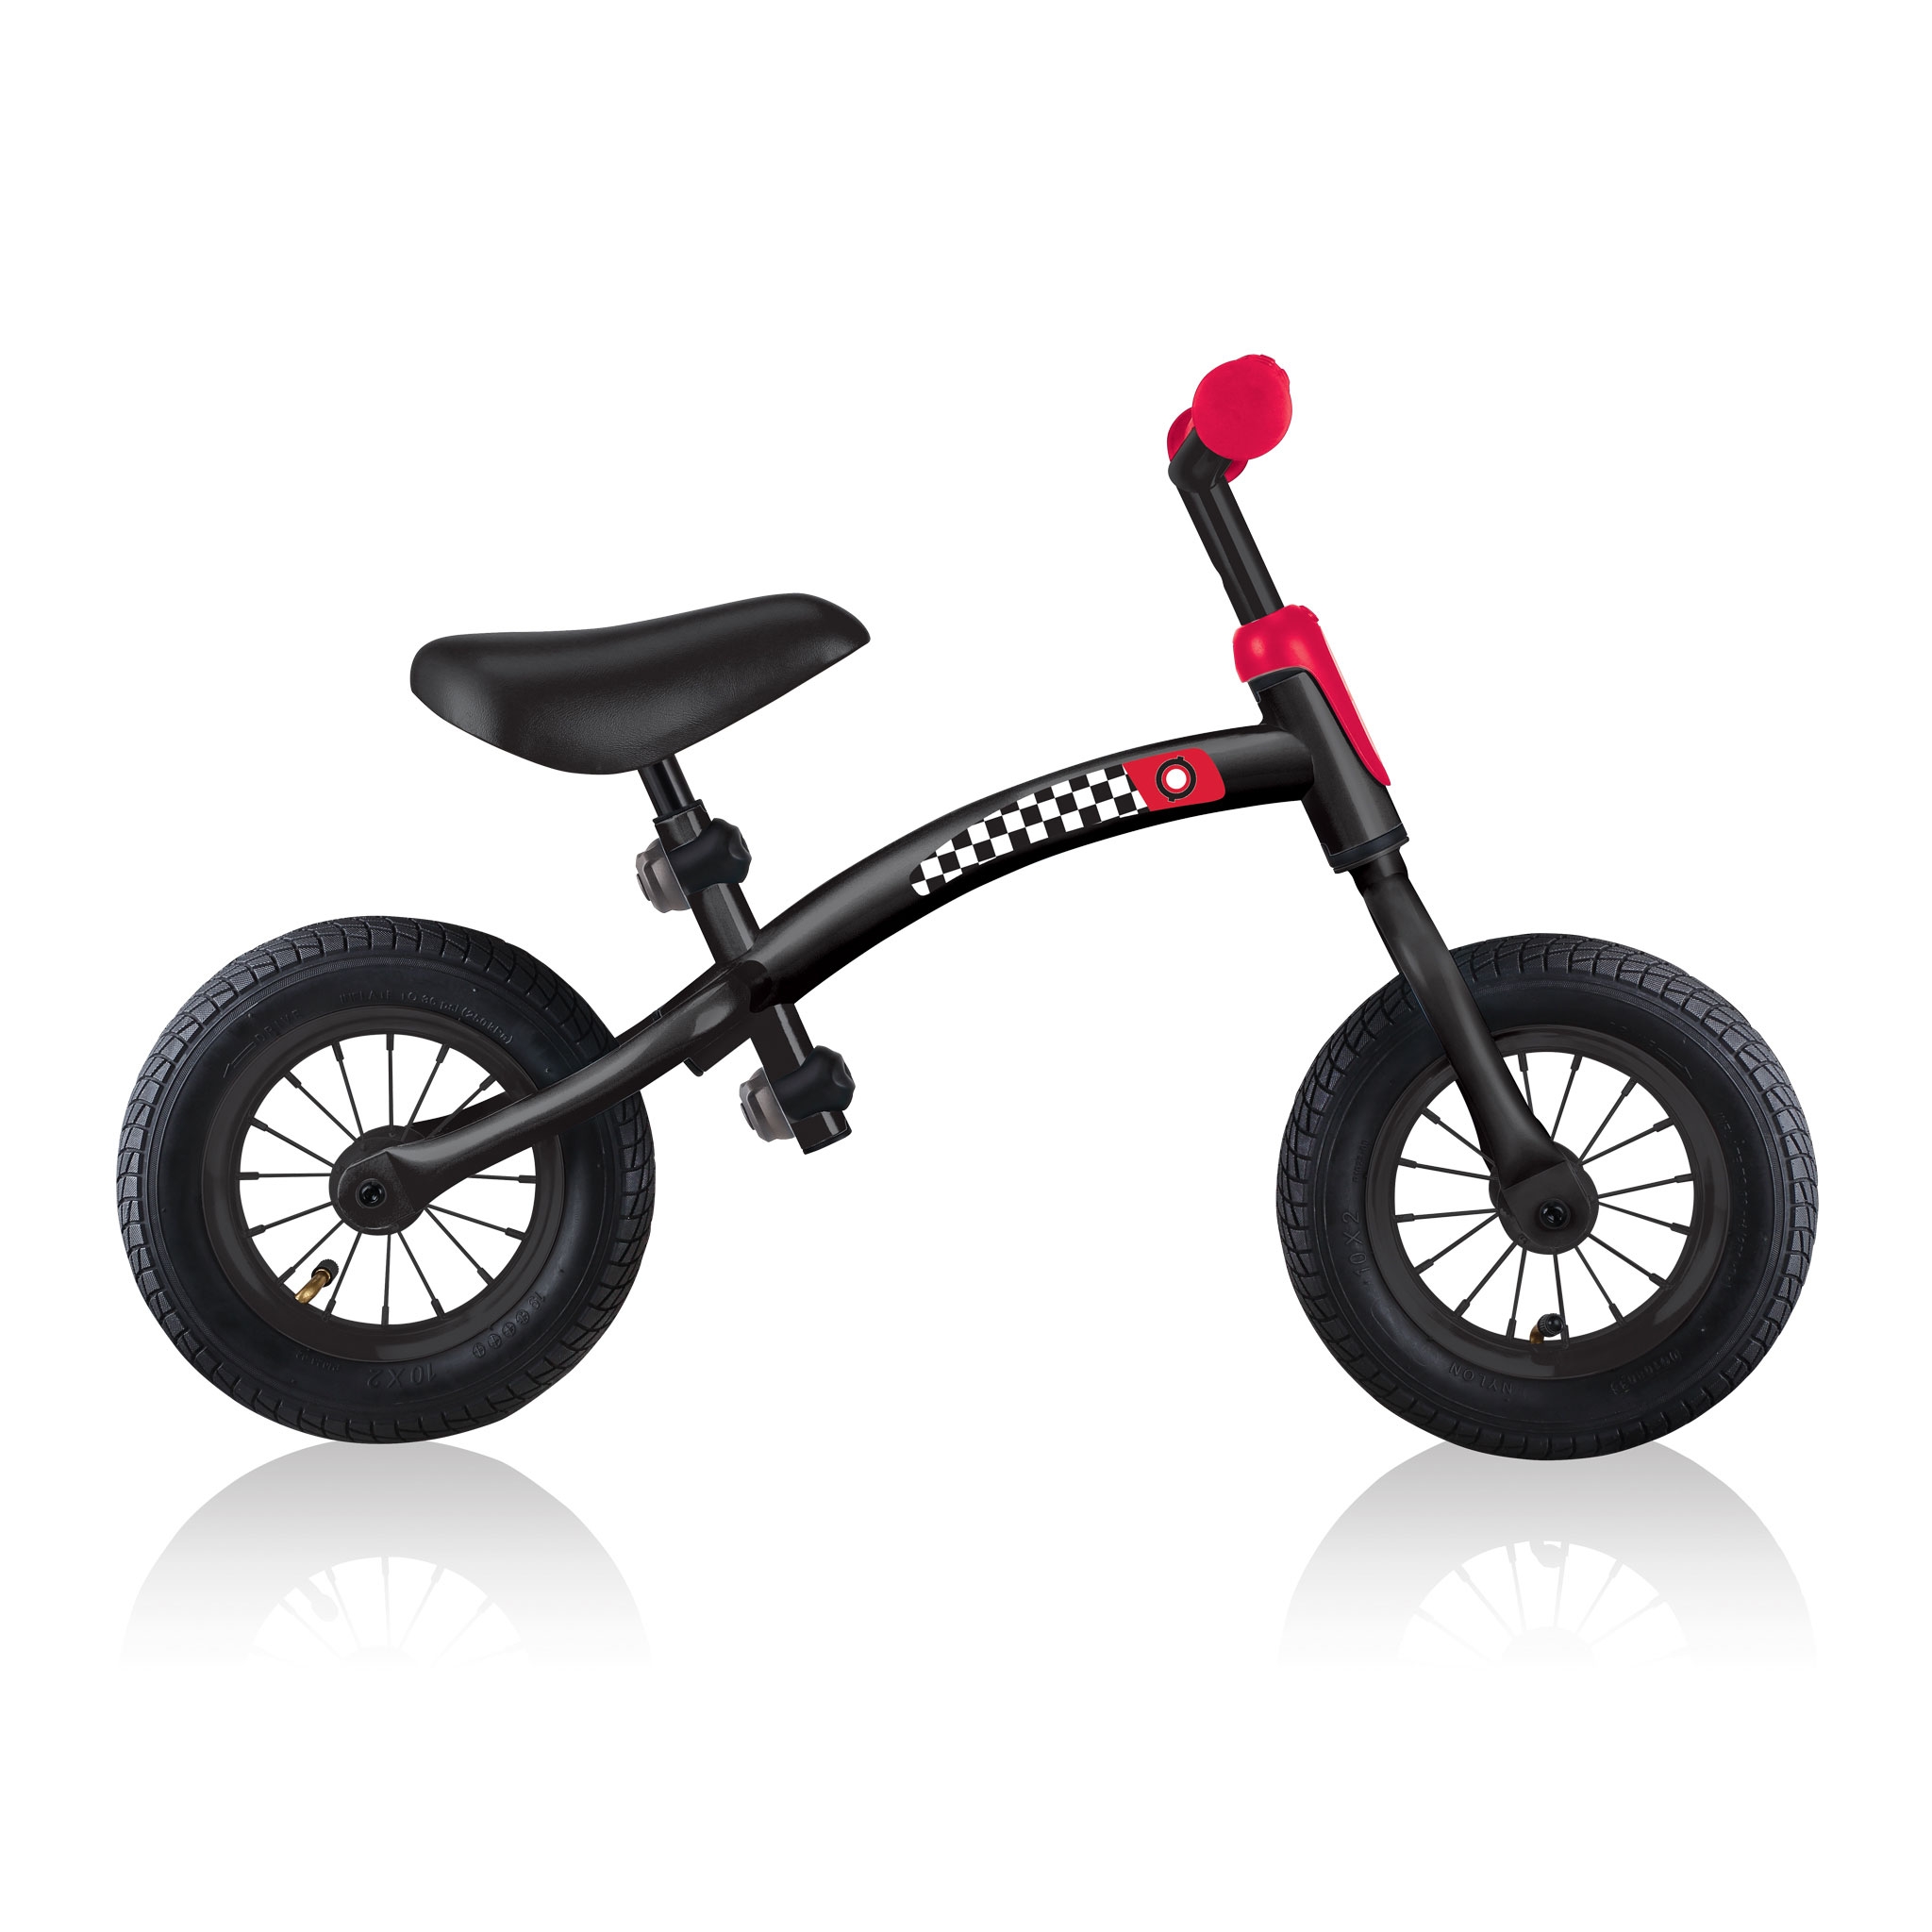 GO-BIKE-AIR-toddler-balance-bike-with-robust-steel-frame-and-shock-absorbing-rubber-tyres_black-red 5